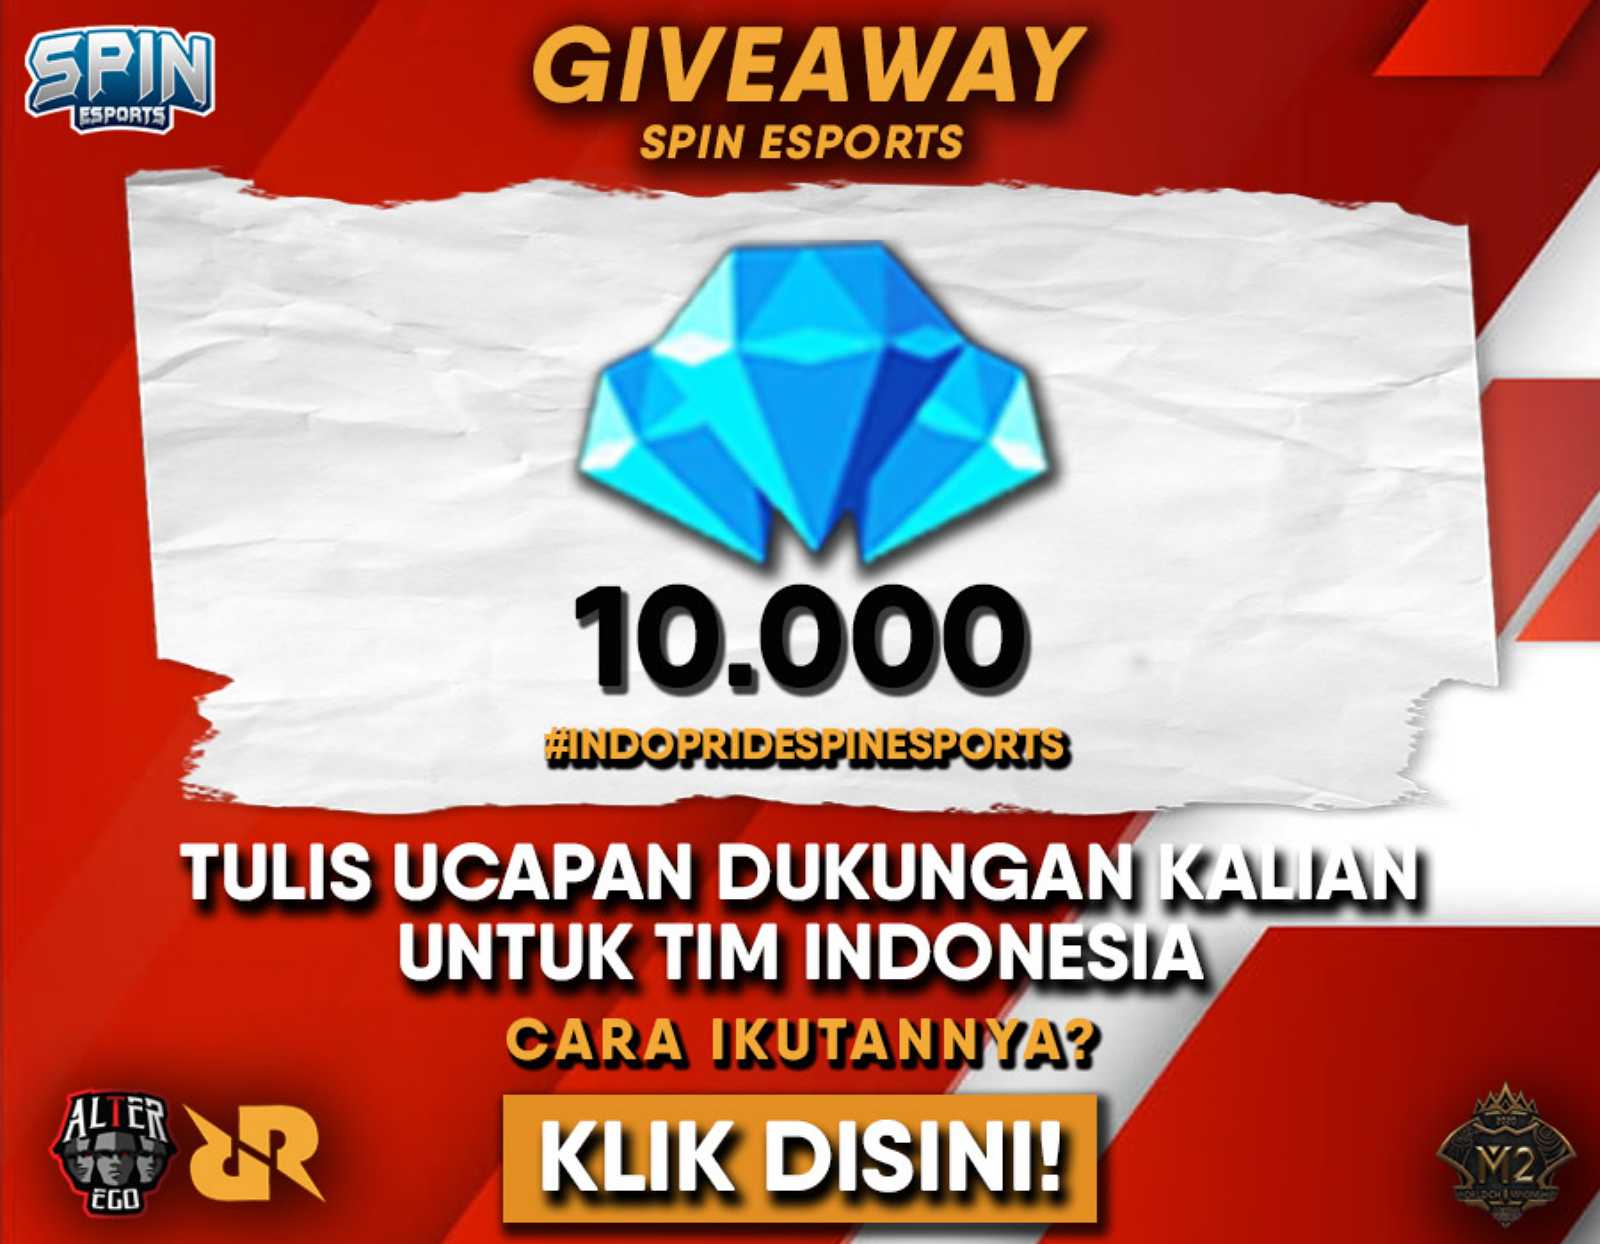 Get 10,000 MLBB Free Diamonds for the M2 Event! How? - Netral.News